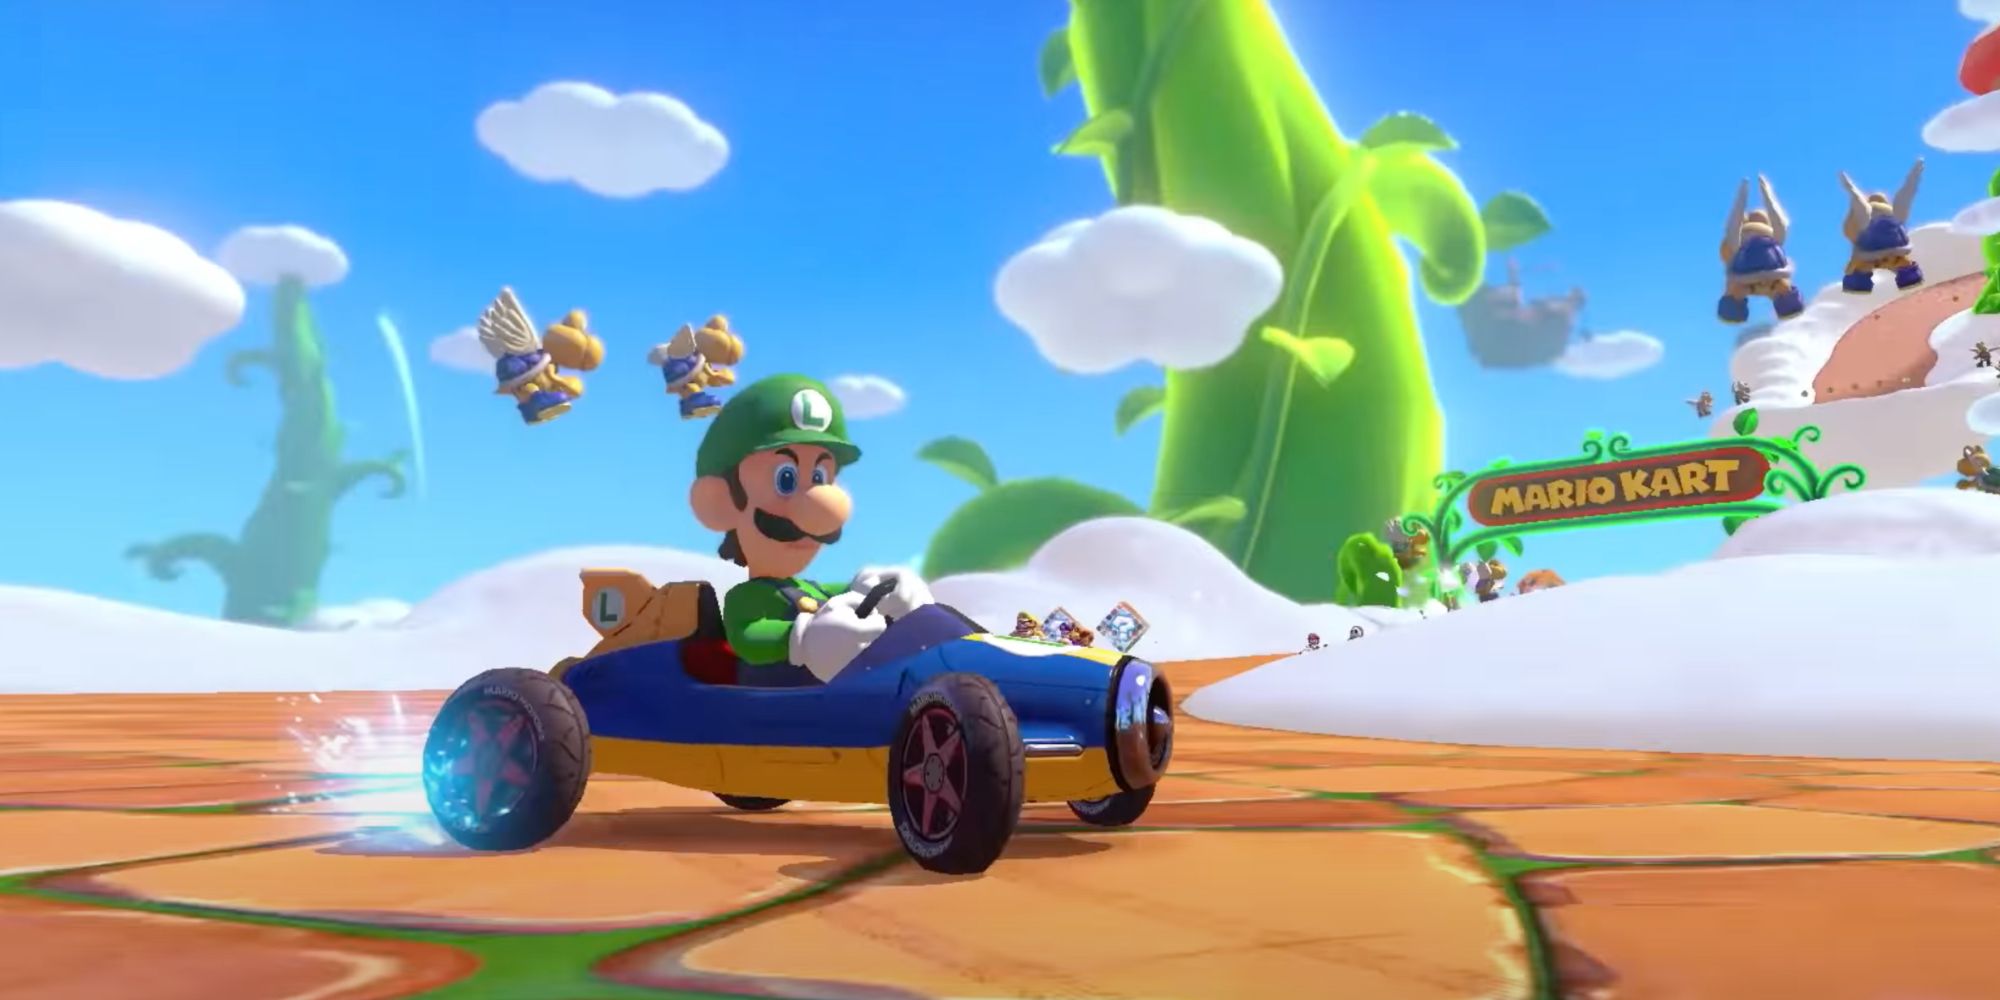 Mario Kart 8 Director Thinks Fighting Is What Makes It Popular